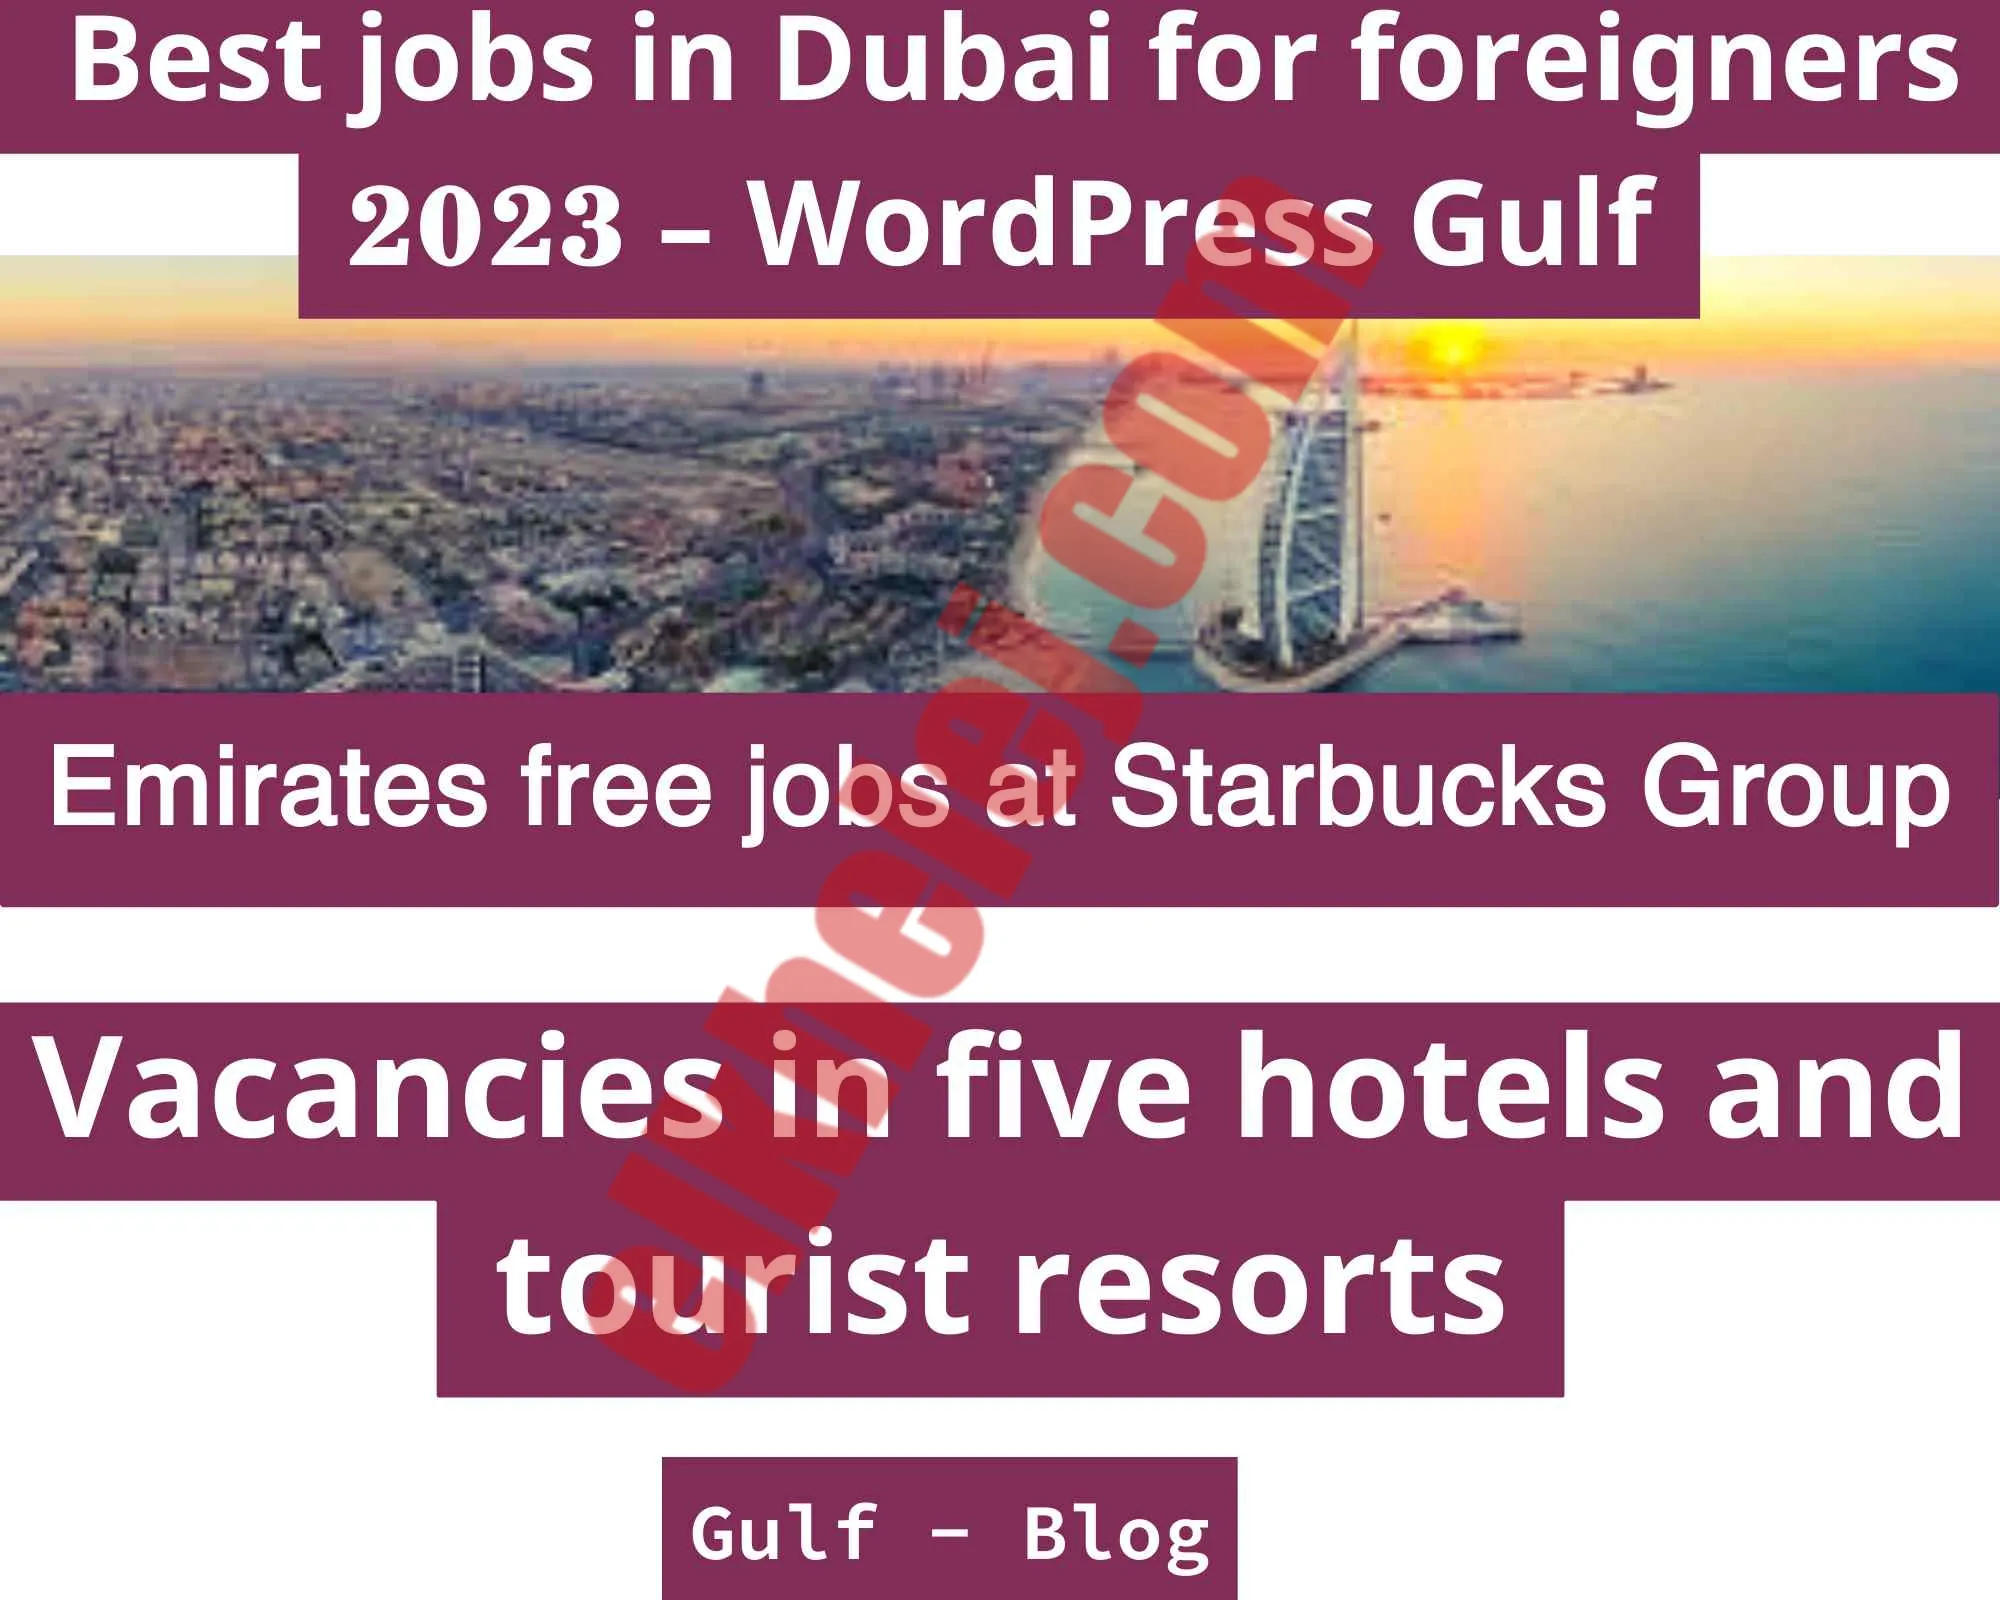 jobs in Dubai for foreigners